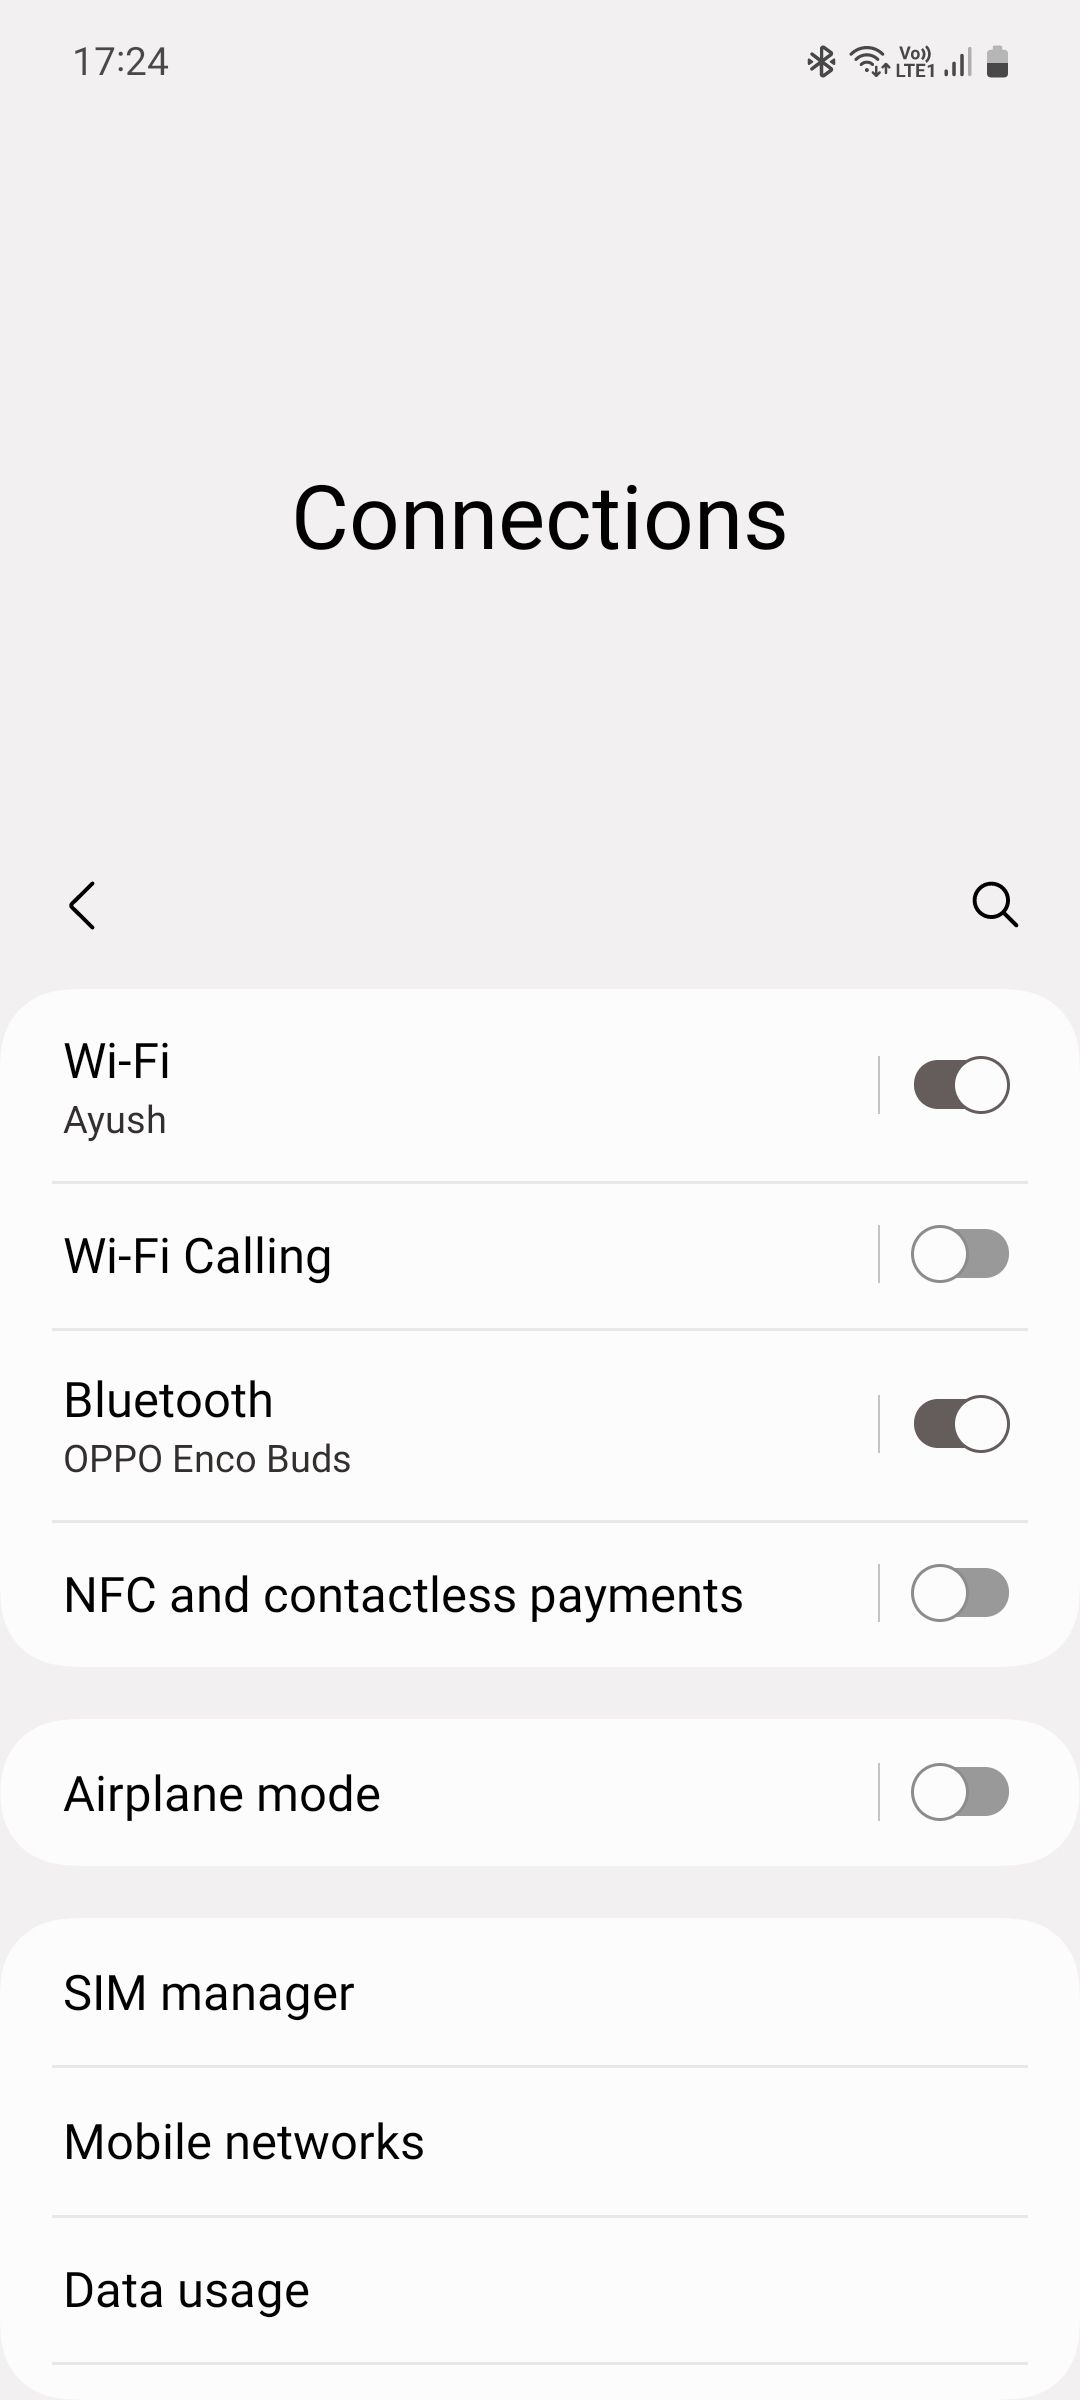 Samsung One UI Connections menu